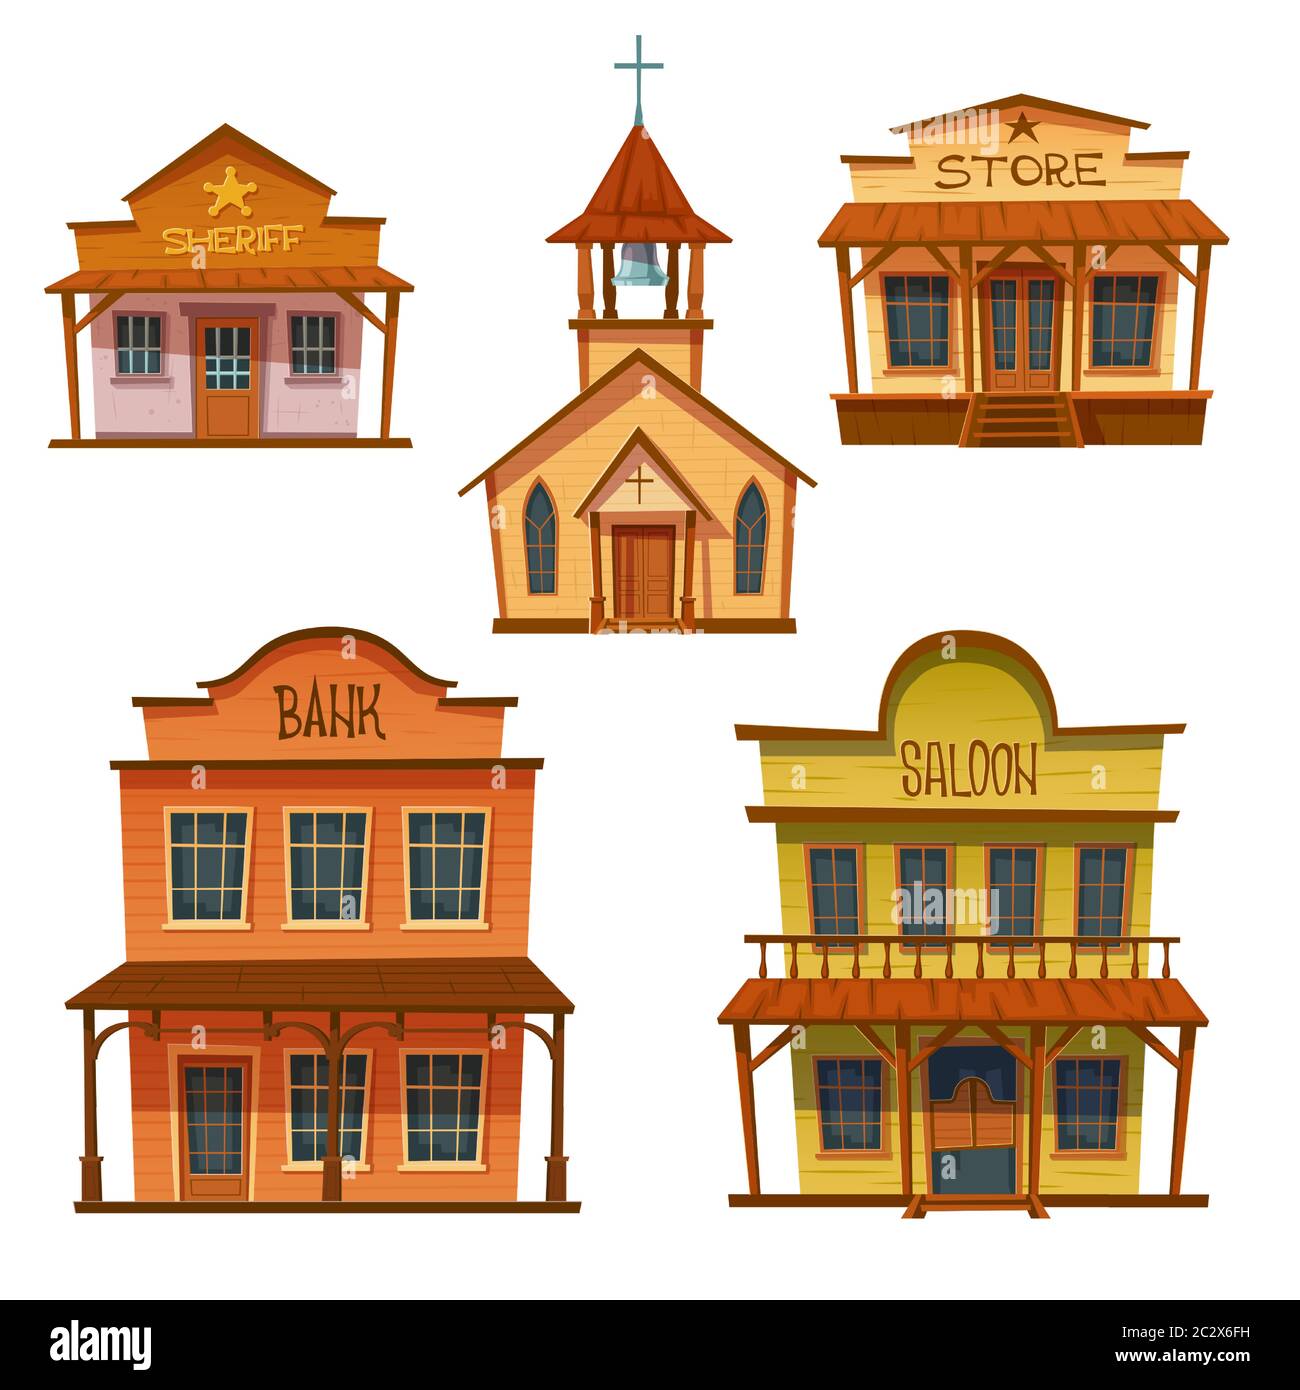 Wild west buildings set. Church, saloon, bank, sheriff and store wooden traditional western architecture isolated on white background. House exterior, Stock Vector